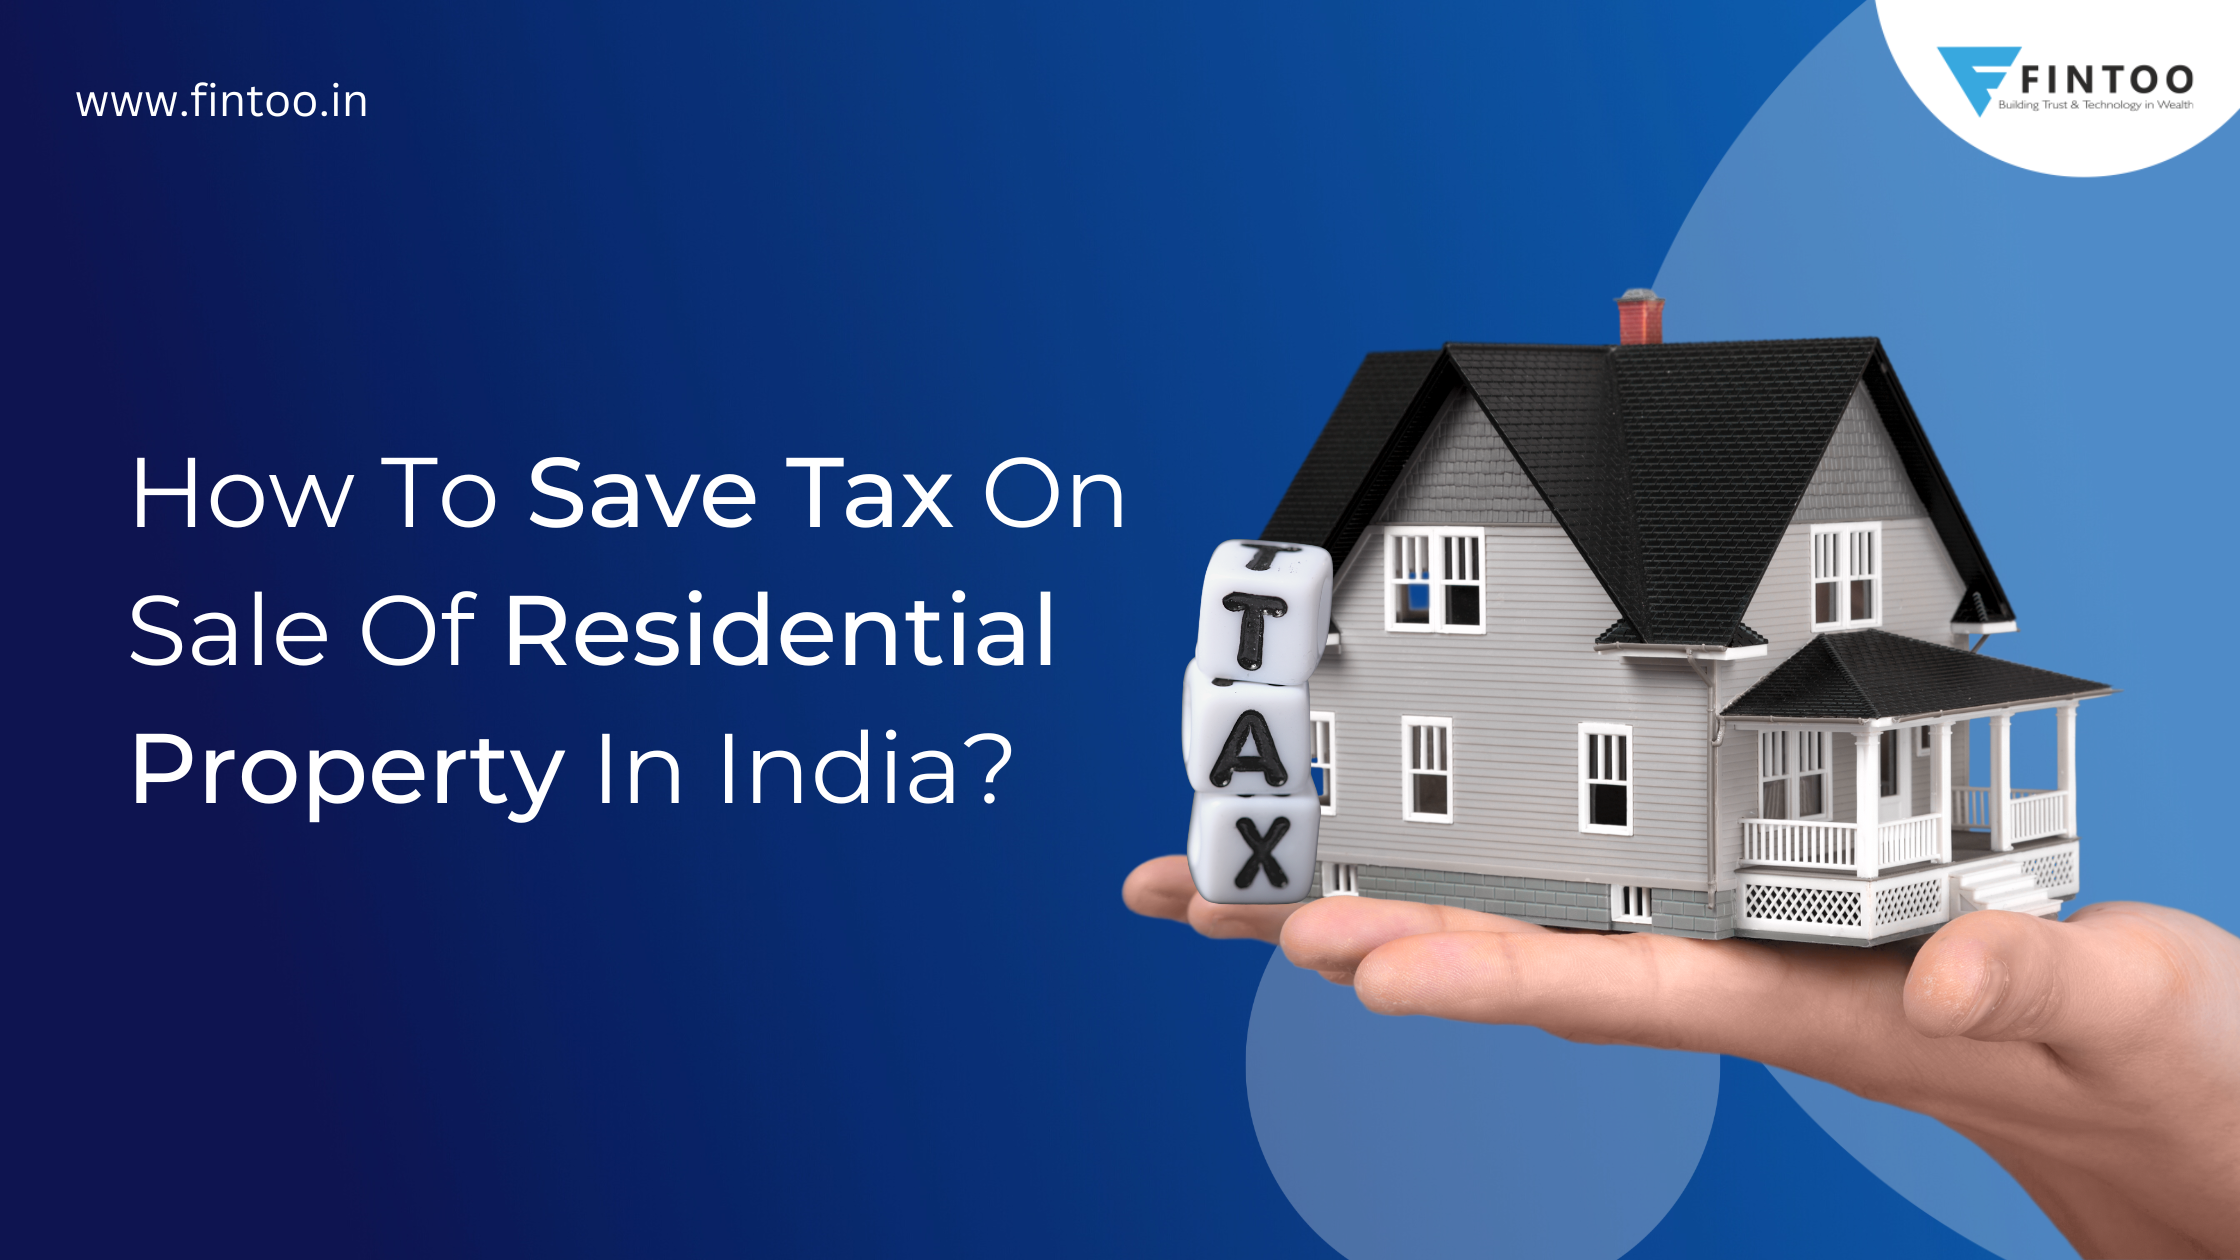 How To Save Tax On Sale Of Residential Property In India?